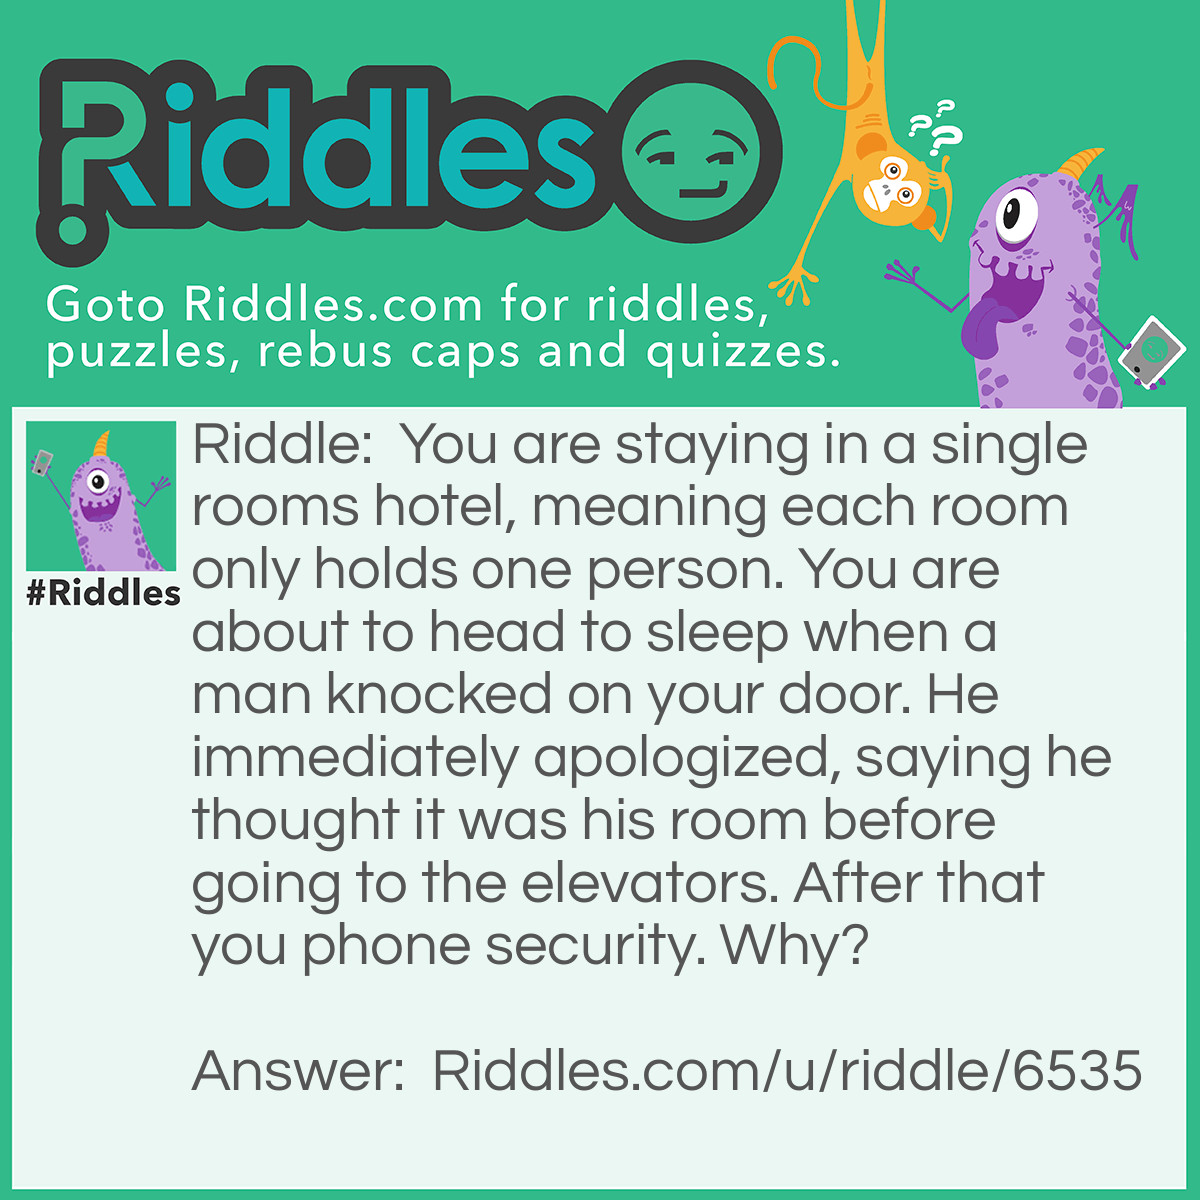 Riddle: You are staying in a single rooms hotel, meaning each room only holds one person. You are about to head to sleep when a man knocked on your door. He immediately apologized, saying he thought it was his room before going to the elevators. After that you phone security. Why? Answer: You don't knock on the door to your own room.